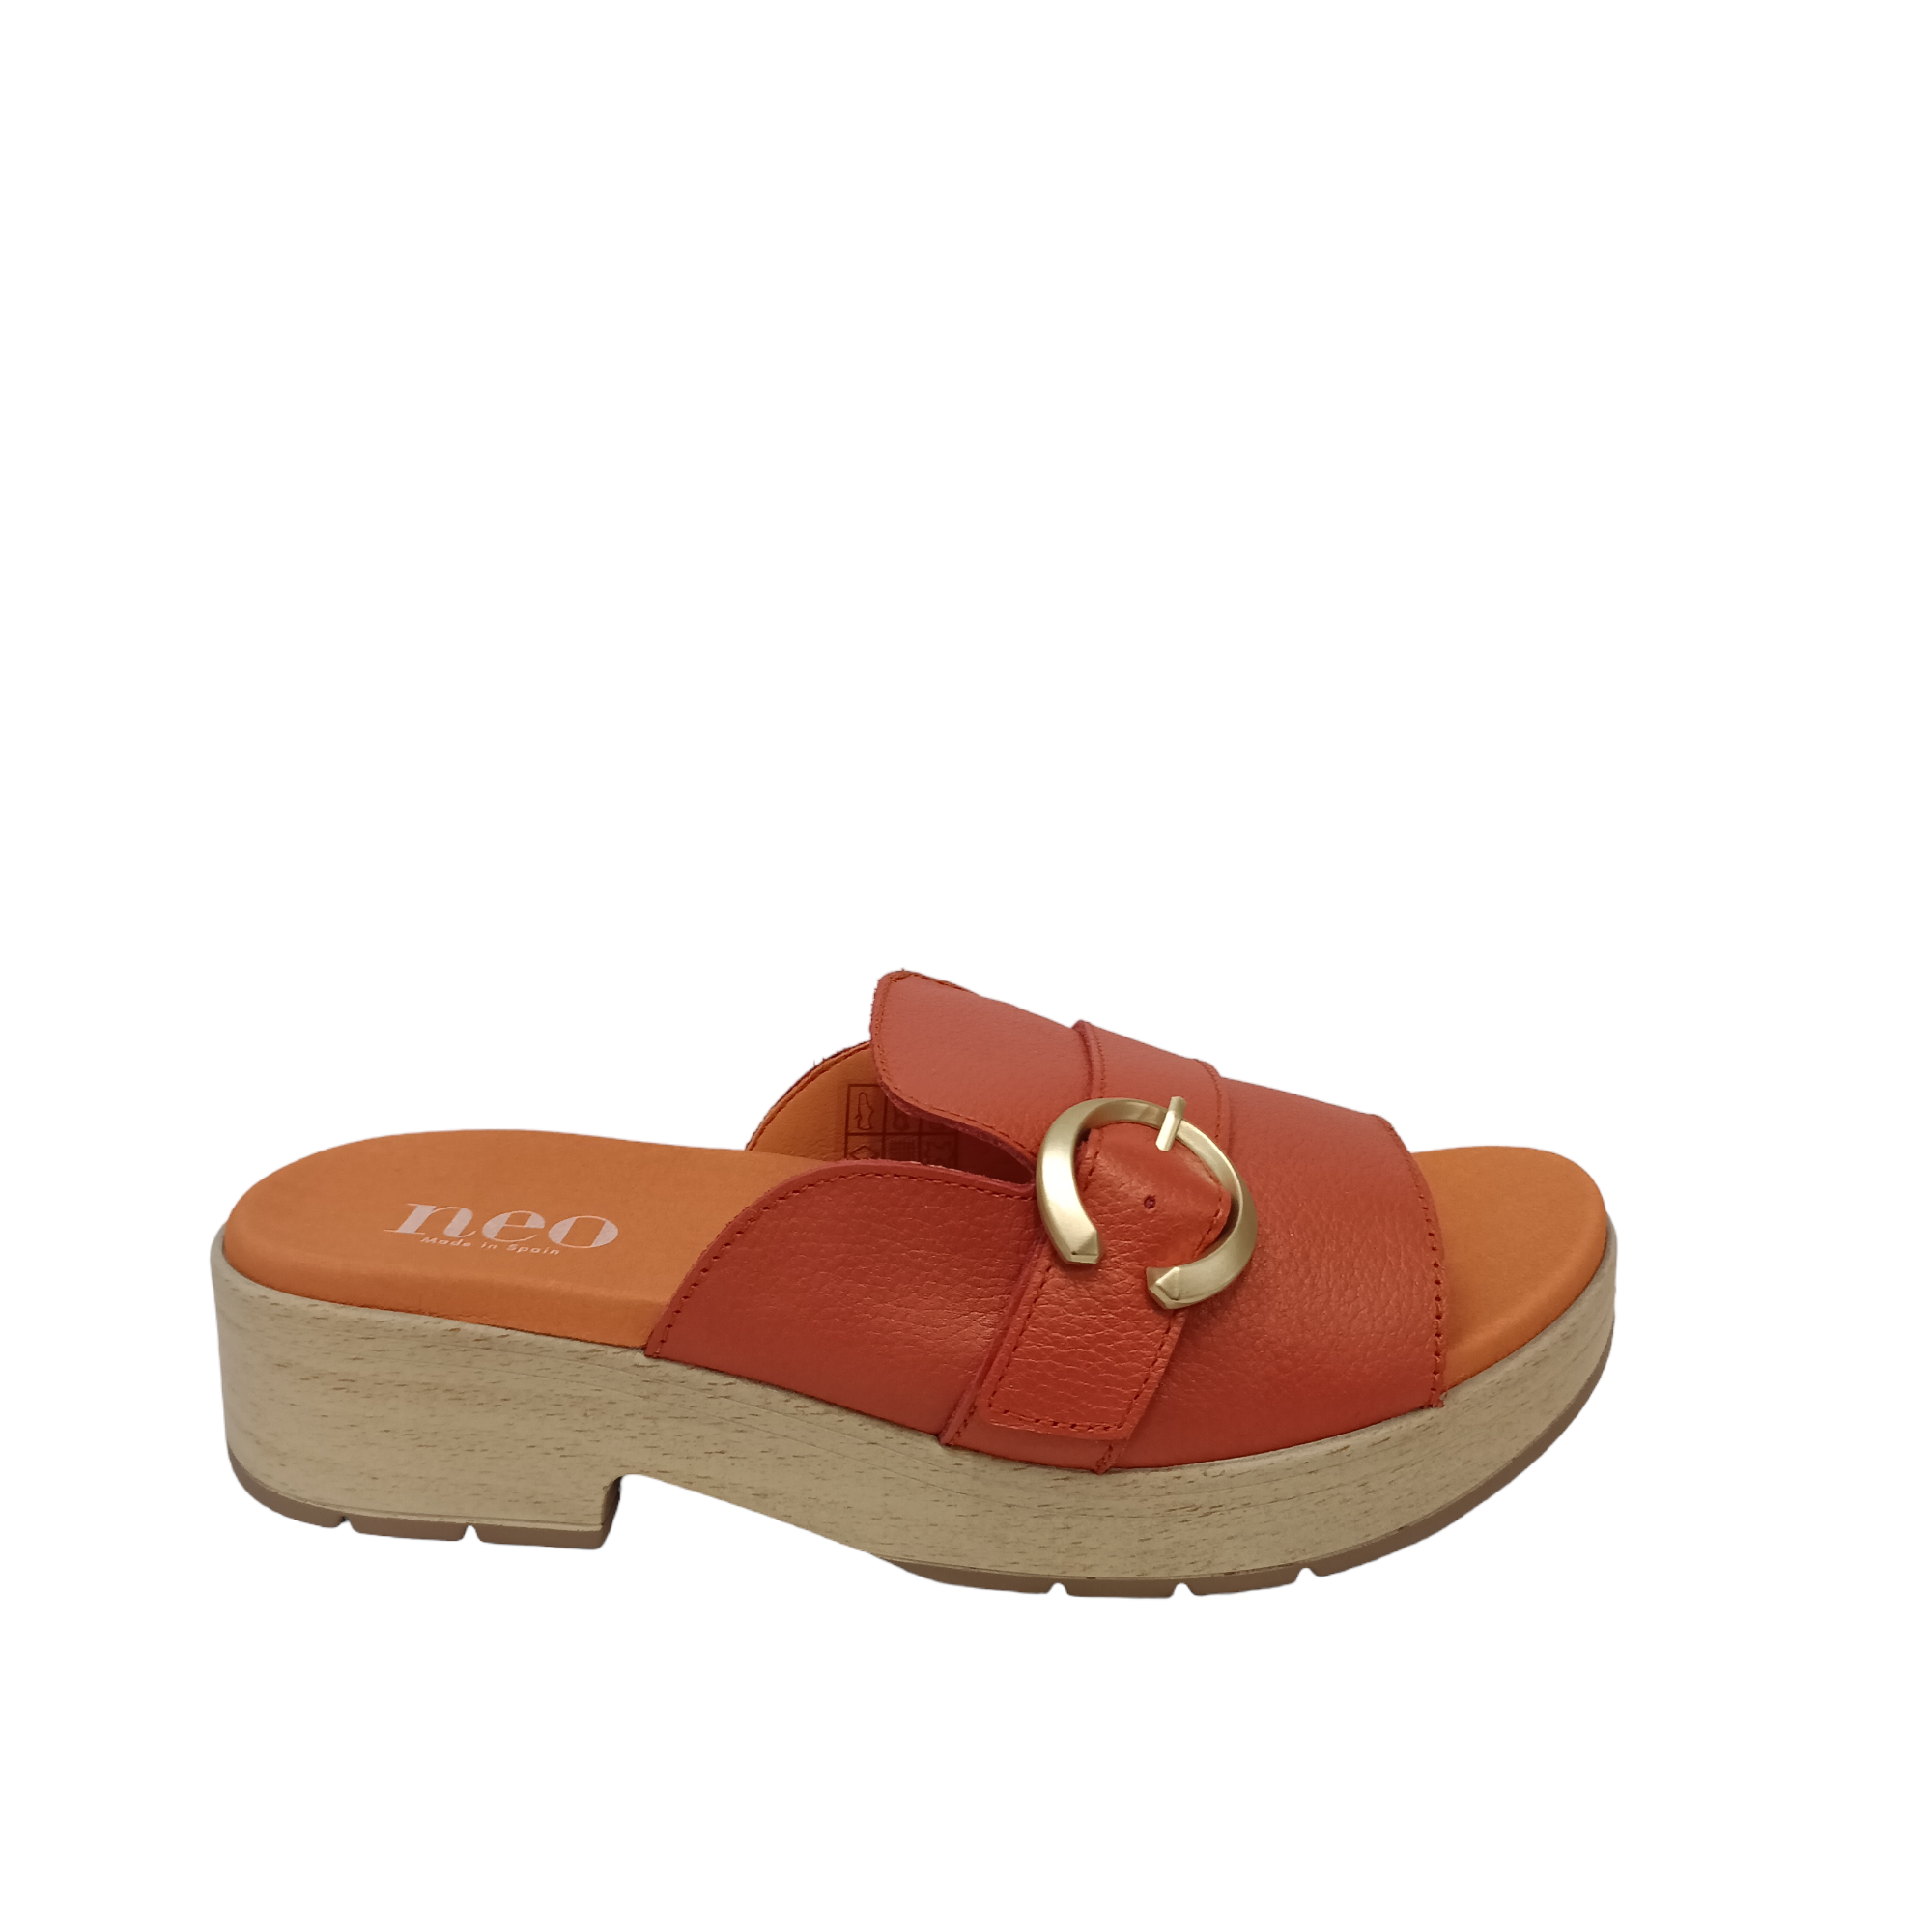 Huff Leather - shoe&me - Neo - Slide - Slides/Scuffs, Summer, Womens